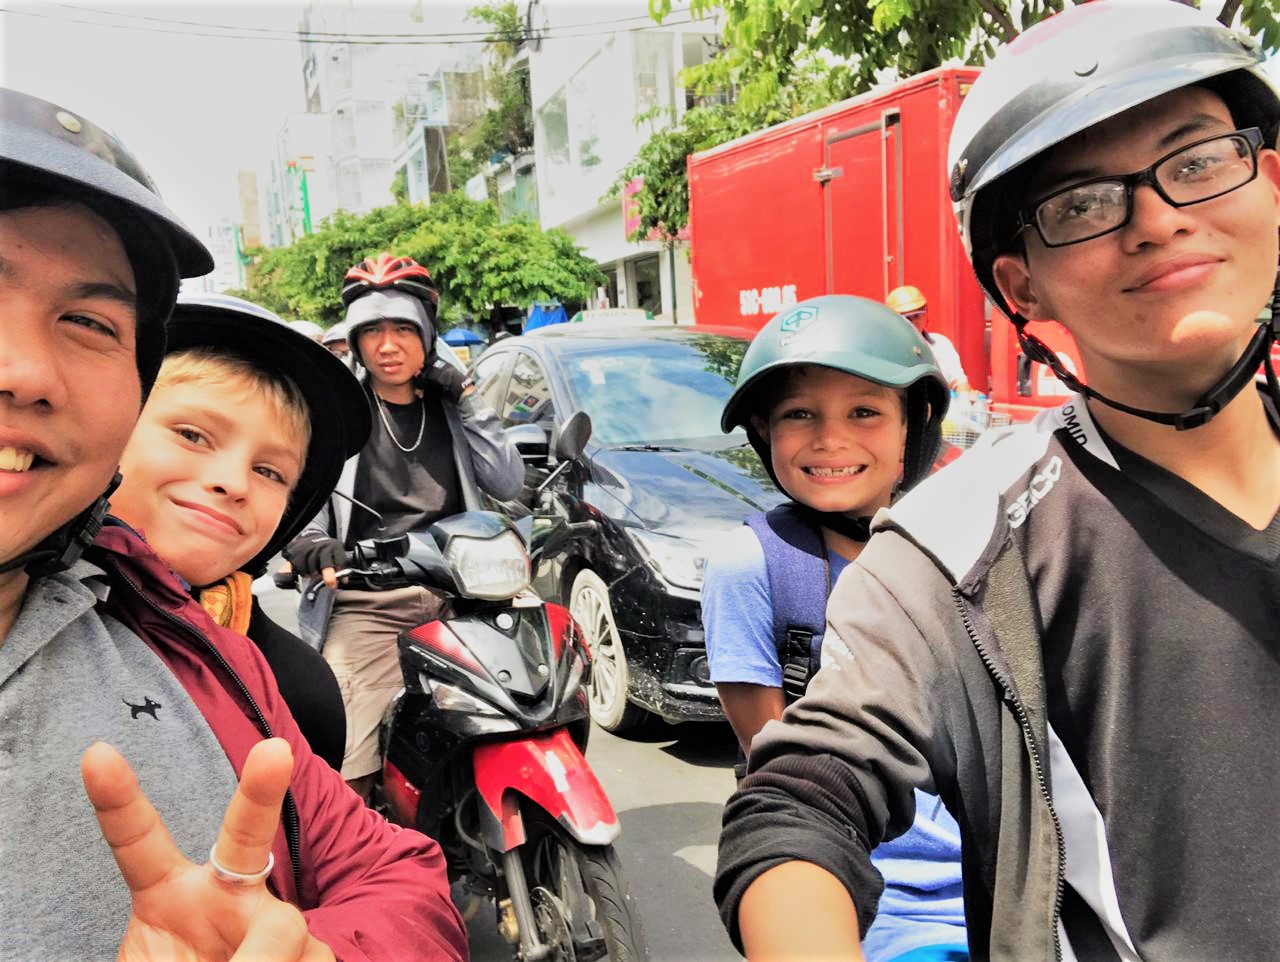 It is so exciting for children join Saigon Motorbike Tour